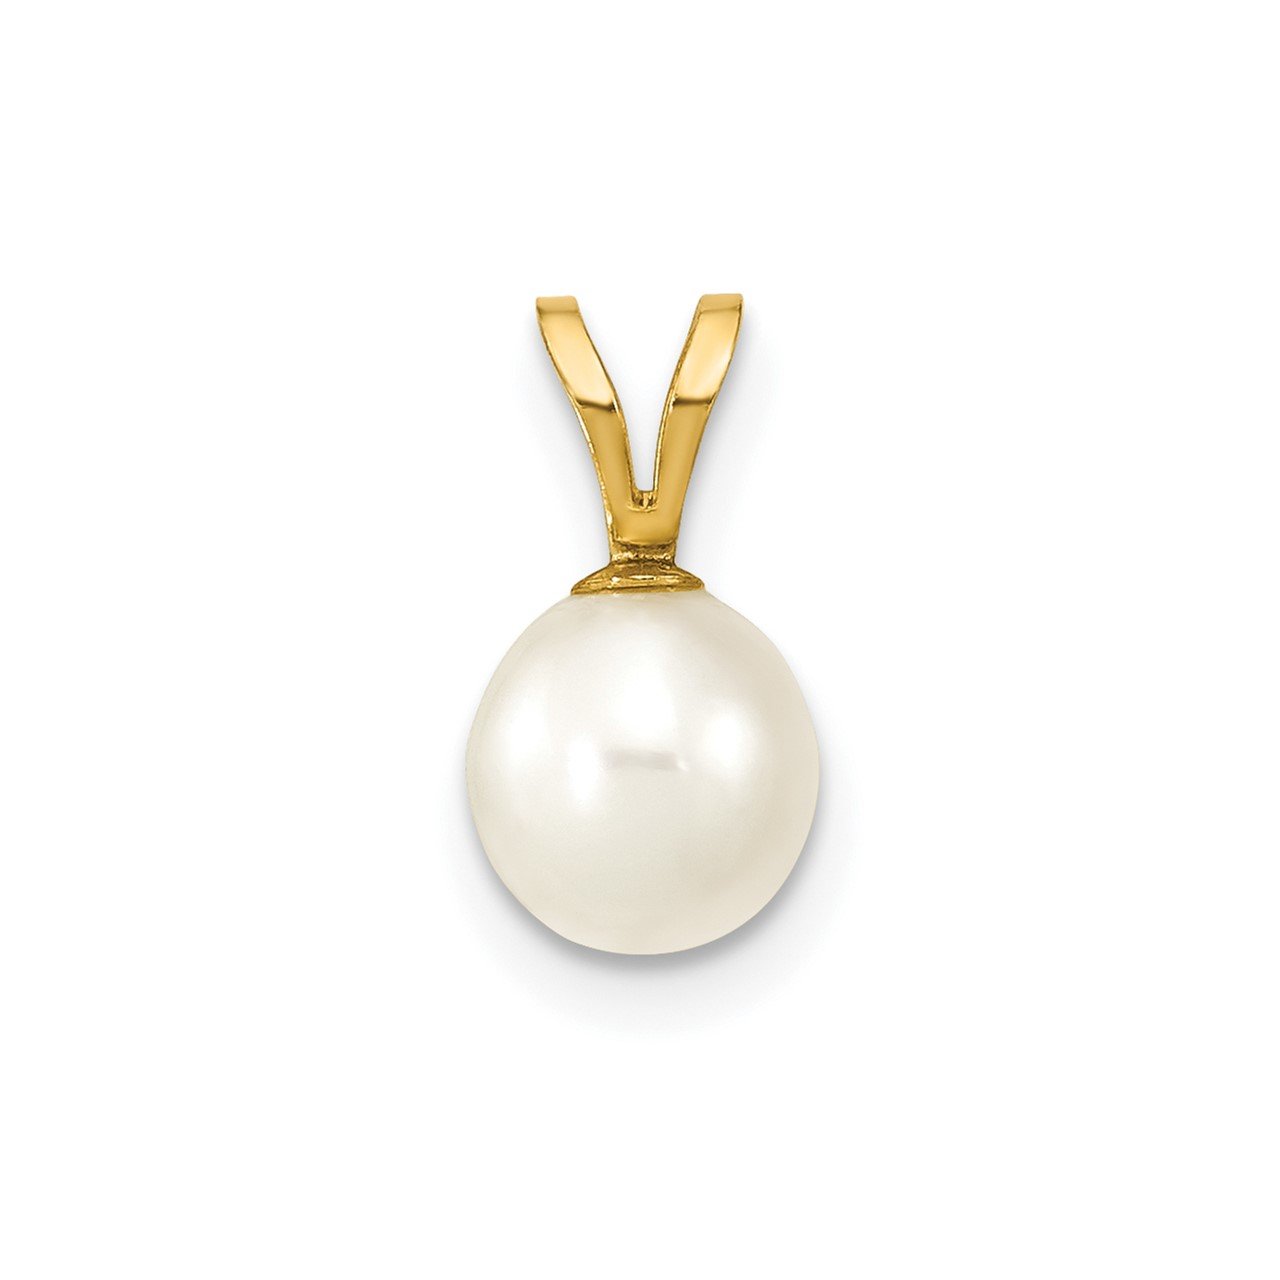 14K 6-7mm Round White FW Cultured Pearl Pendant